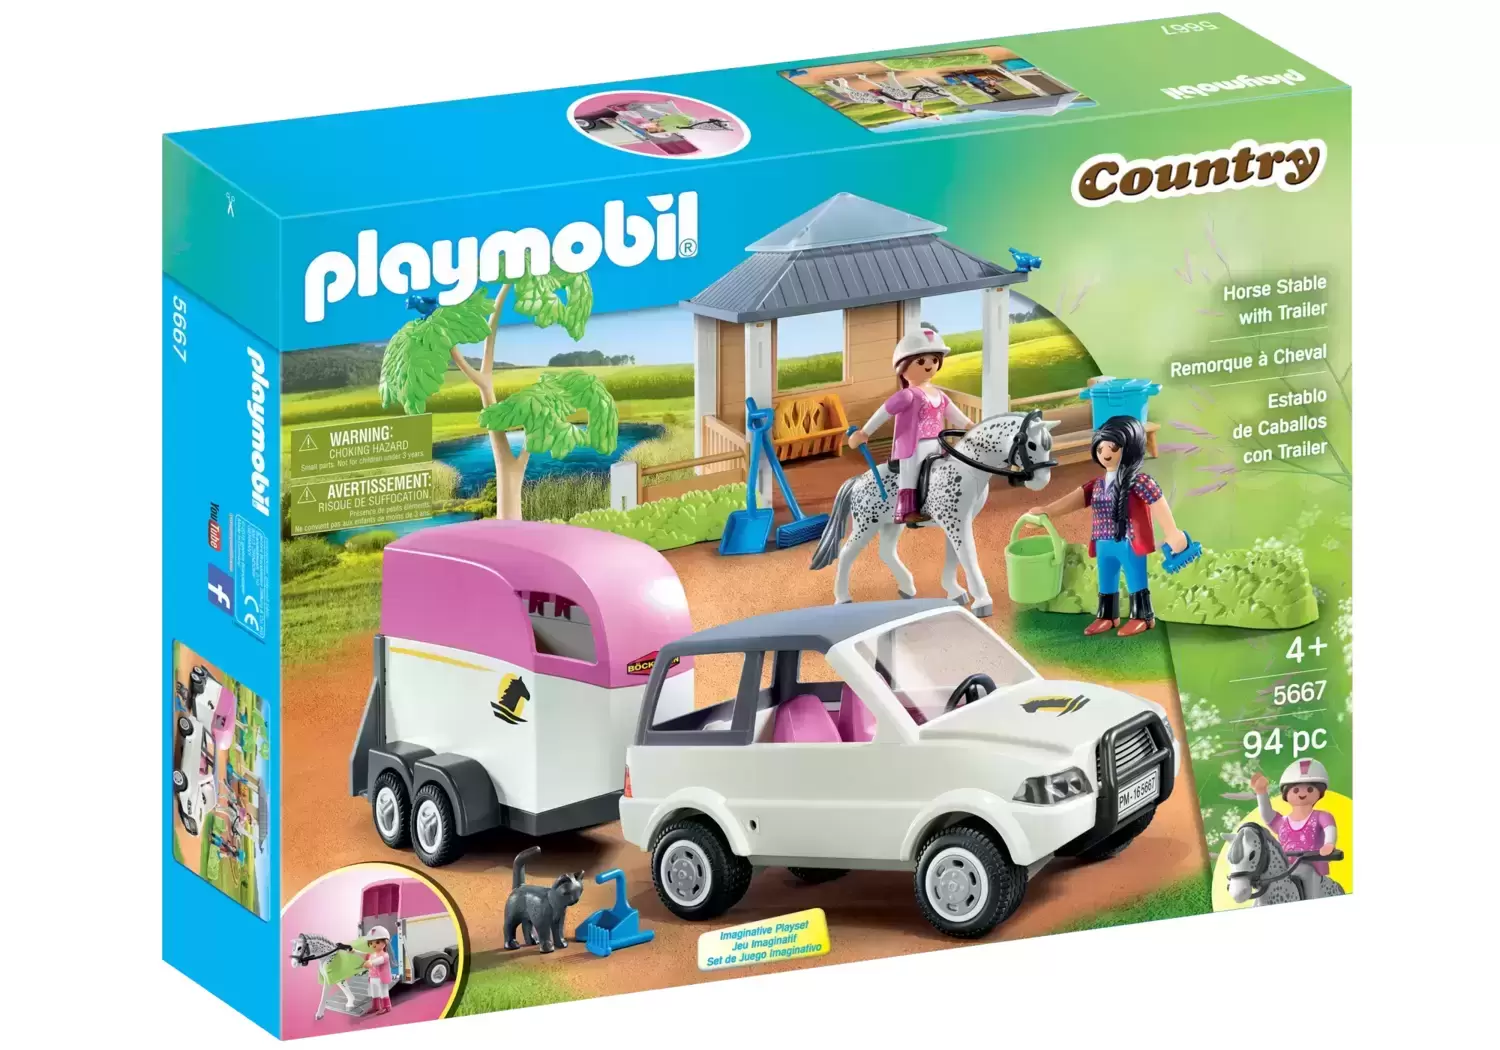 Playmobil Horse Riding - Horse stable with trailer